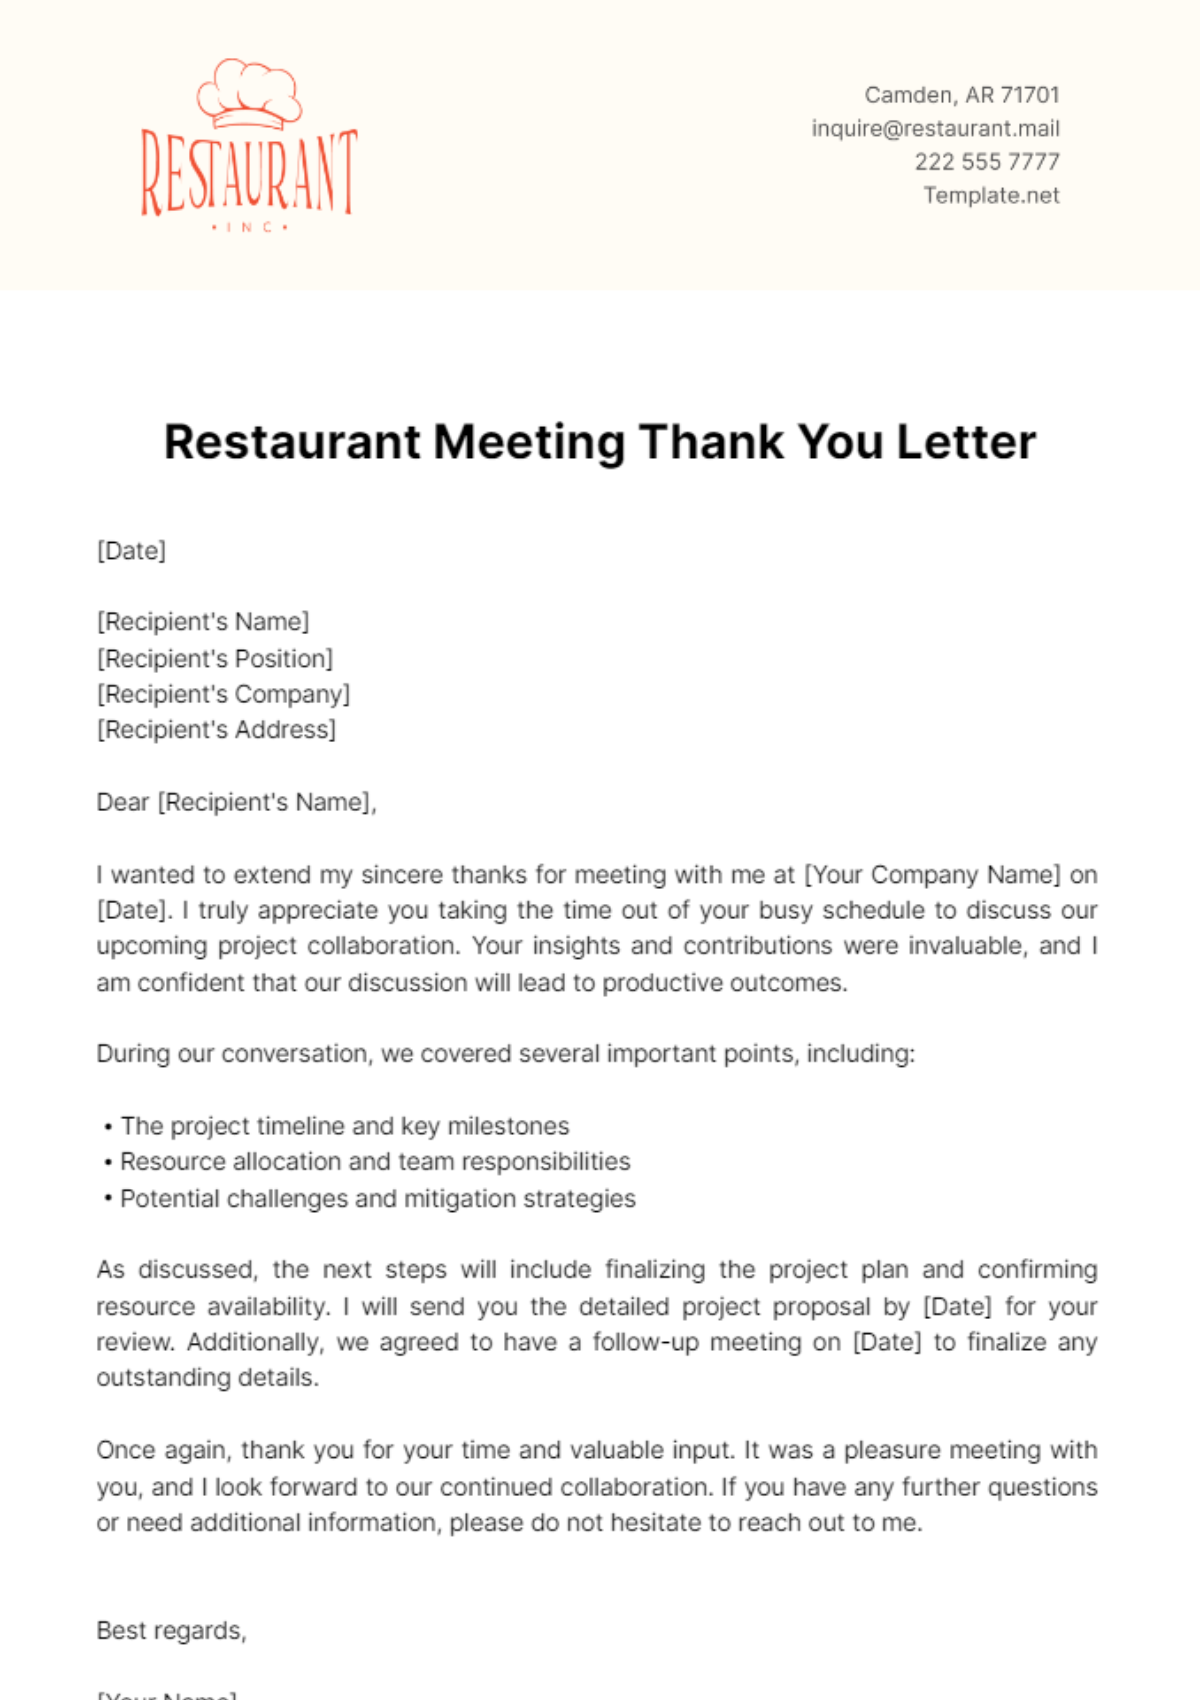 Free Restaurant Meeting Thank You Letter Template